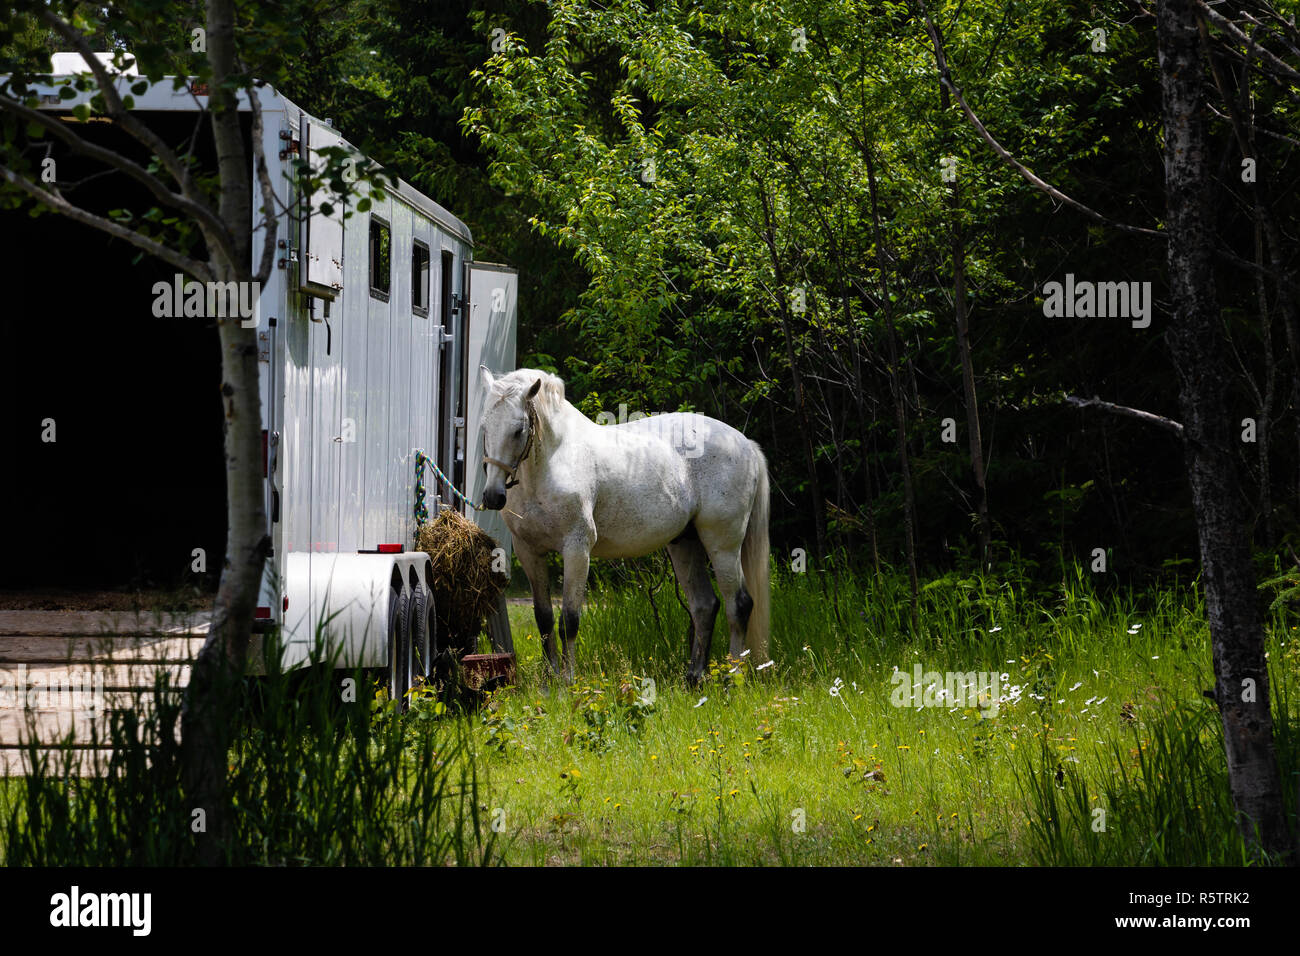 A white horse attched to a truck eating grass. Stock Photo